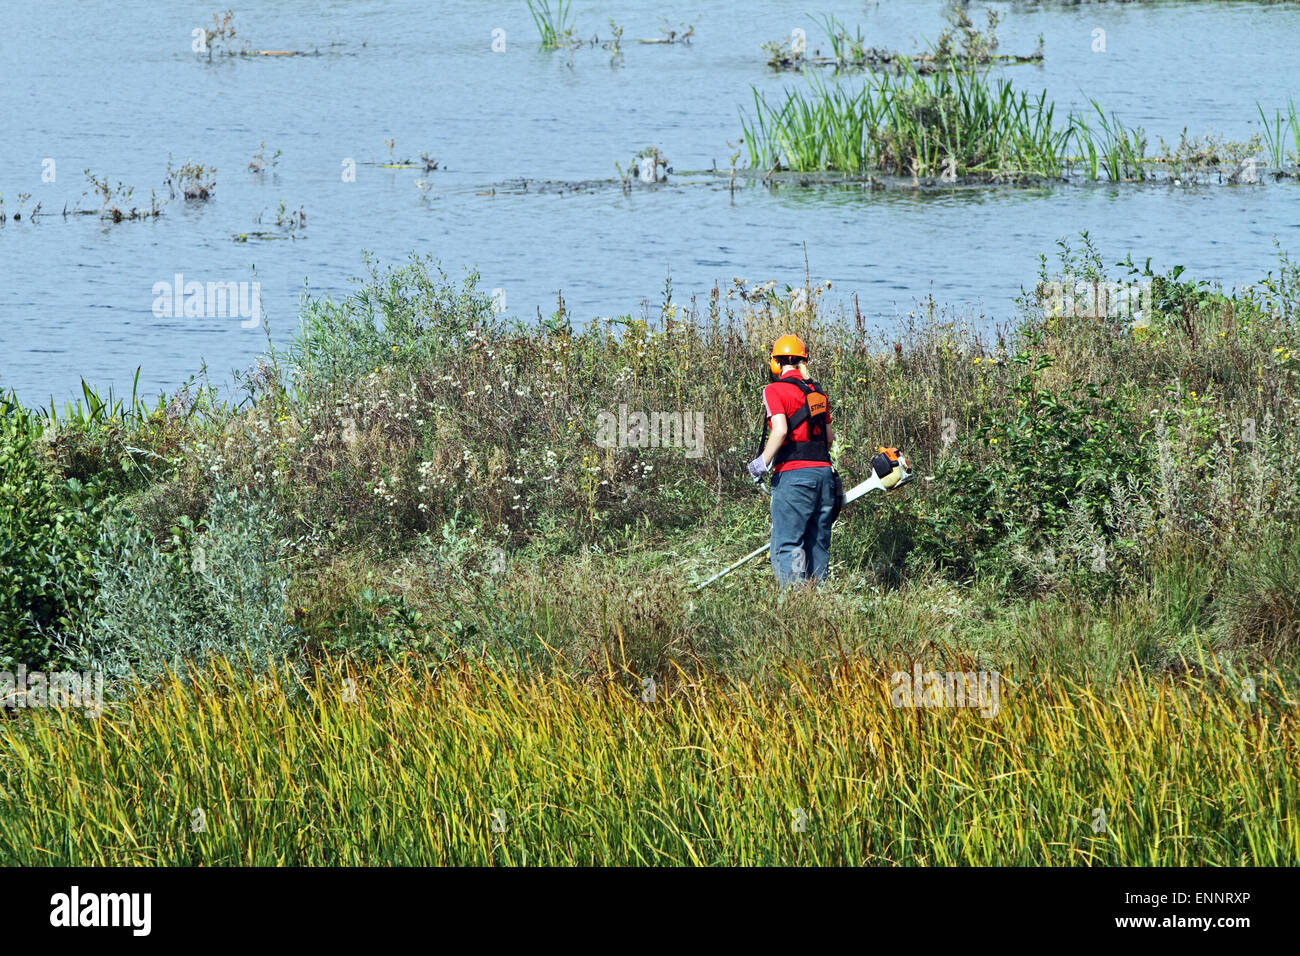 Worker strimming back weeds on a nature reserve. Stock Photo